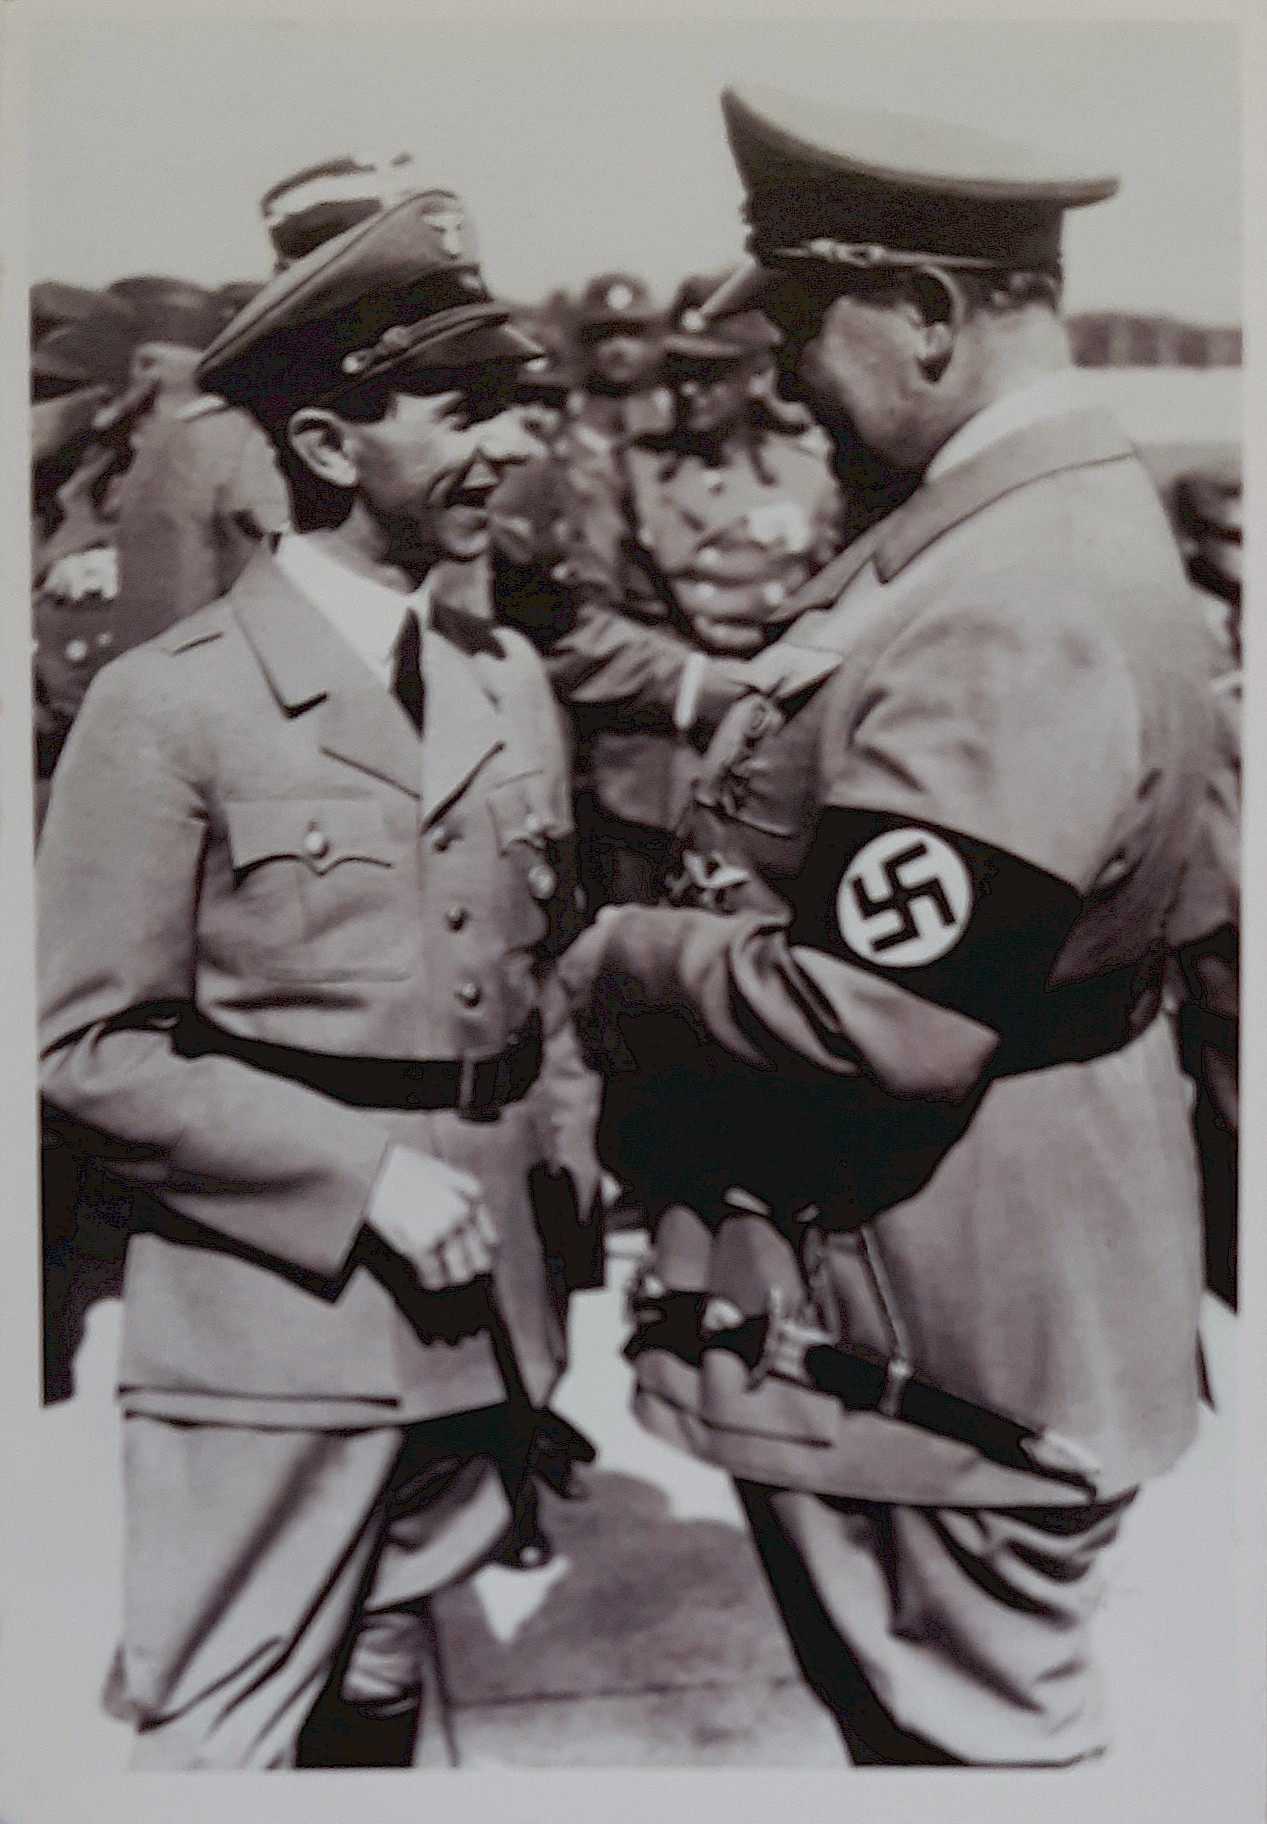 UNSERE WAFFEN SS POSTCARD - HERMAN GORING AND JOSEPH GOEBBELS IMAGE